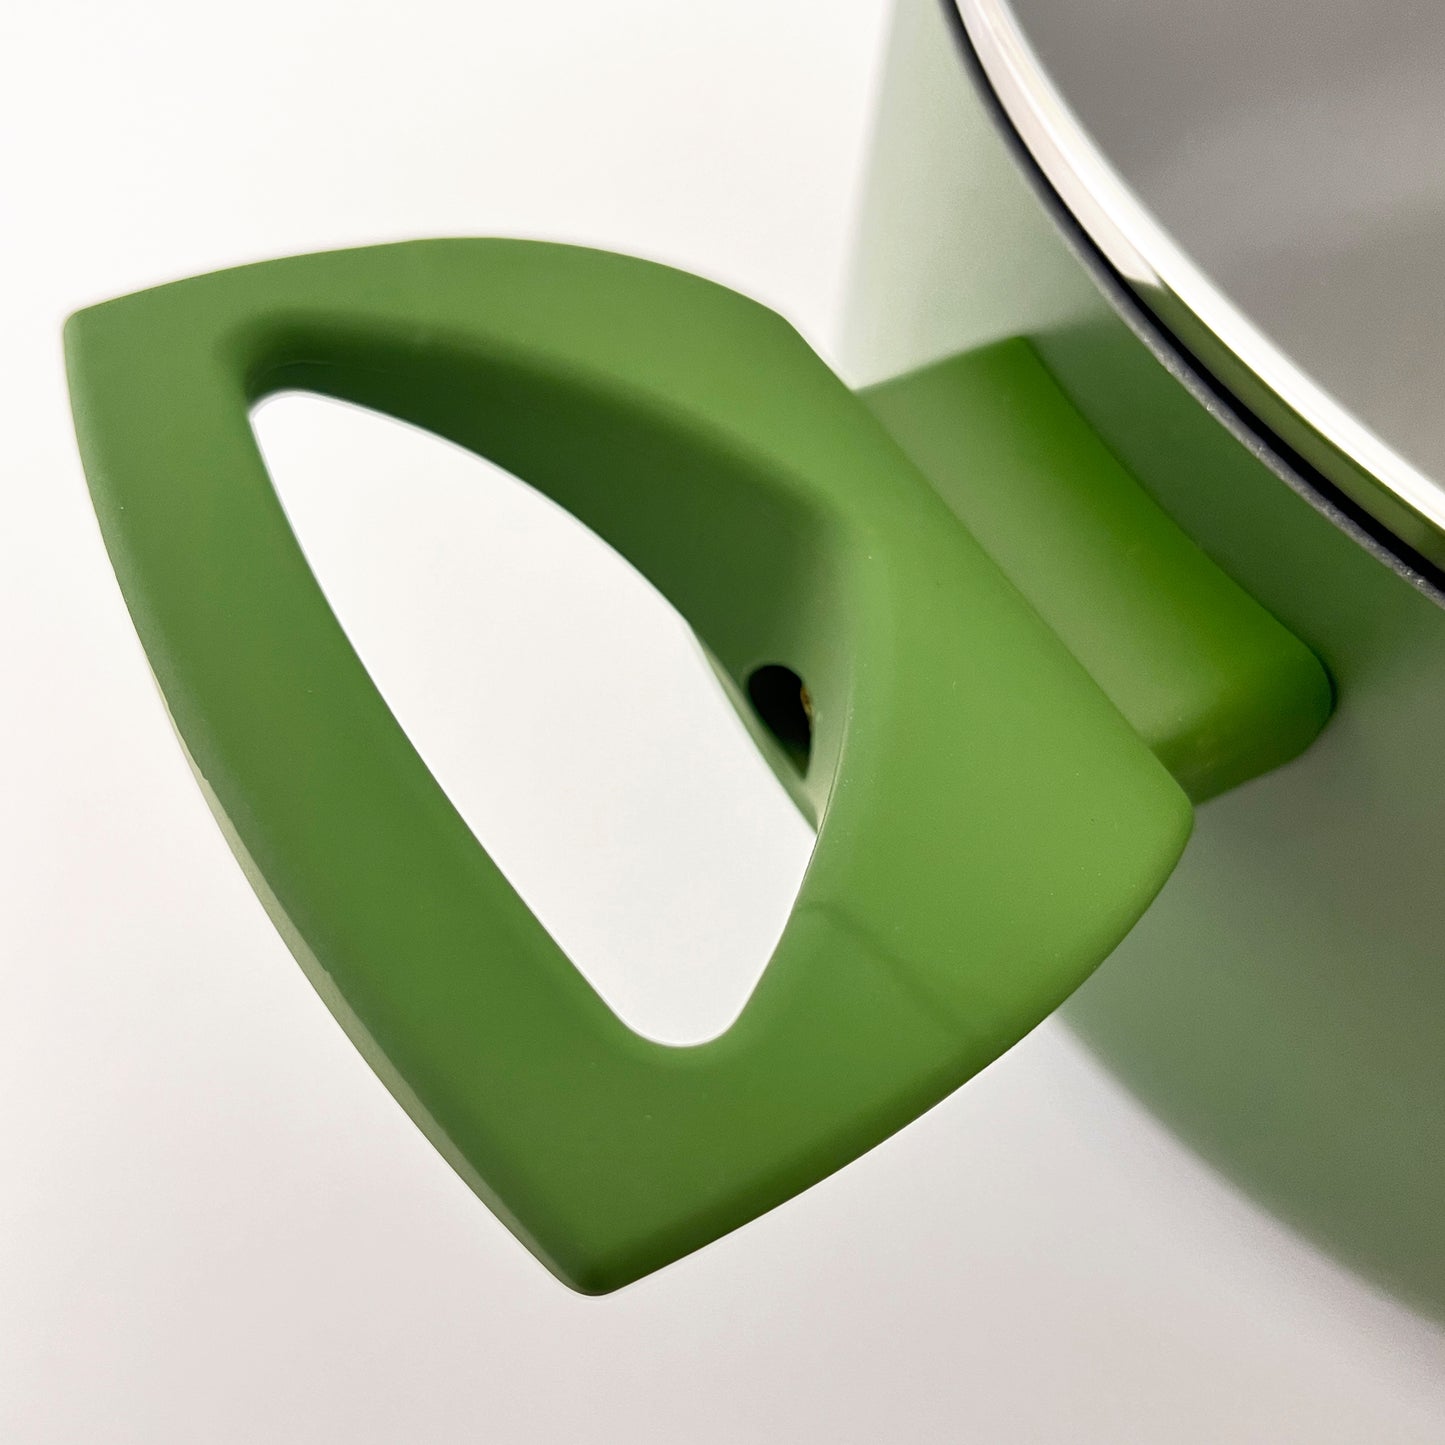 Jungle green COLORS saucepan, suitable for all types of cookers, including induction